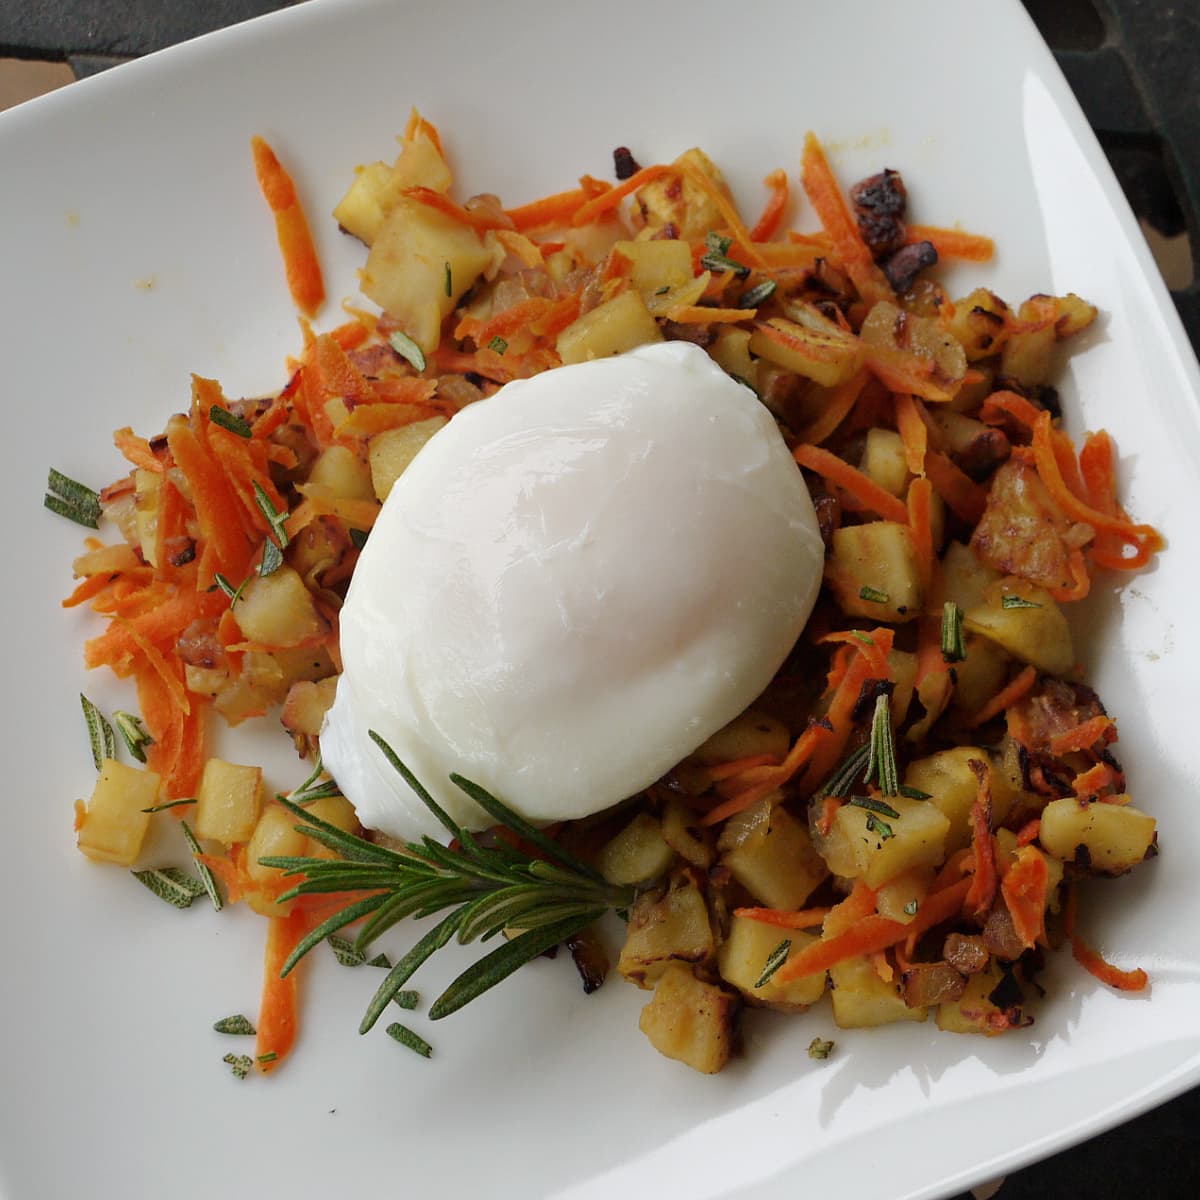 One poached egg sitting atop a small bed of sweet potato hash. Garnished with rosemary.